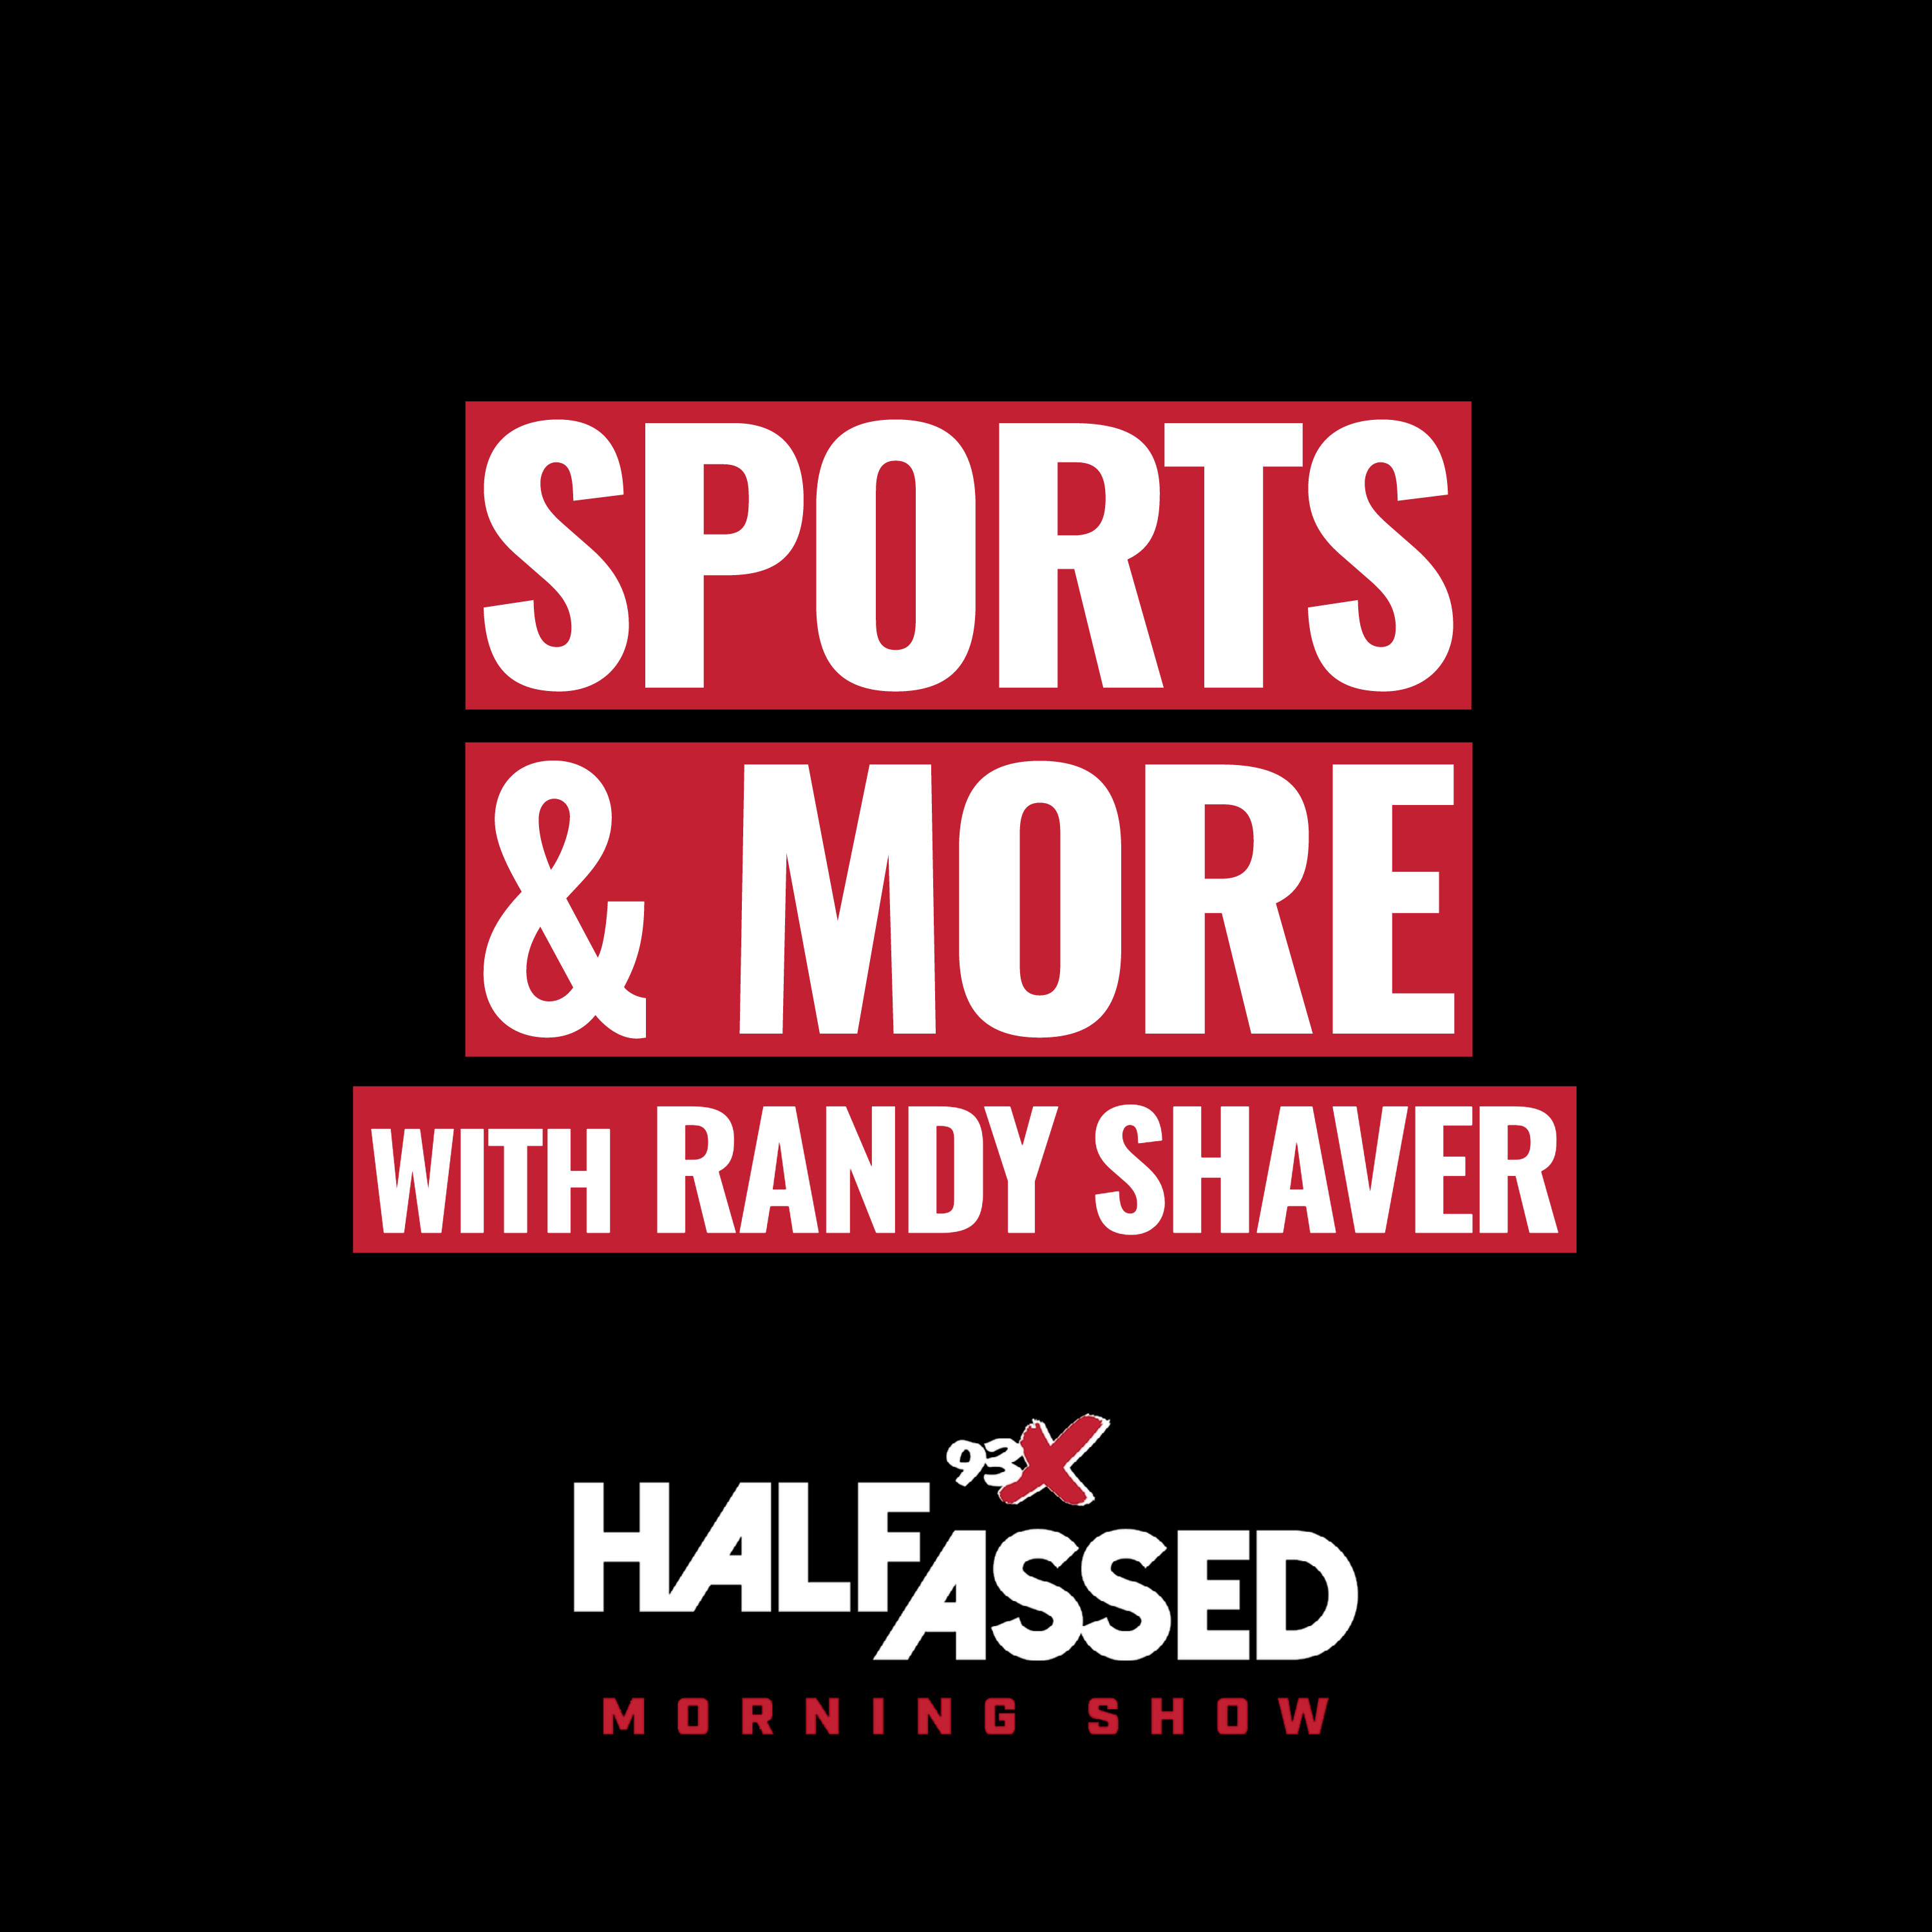 Sports & More with Randy Shaver